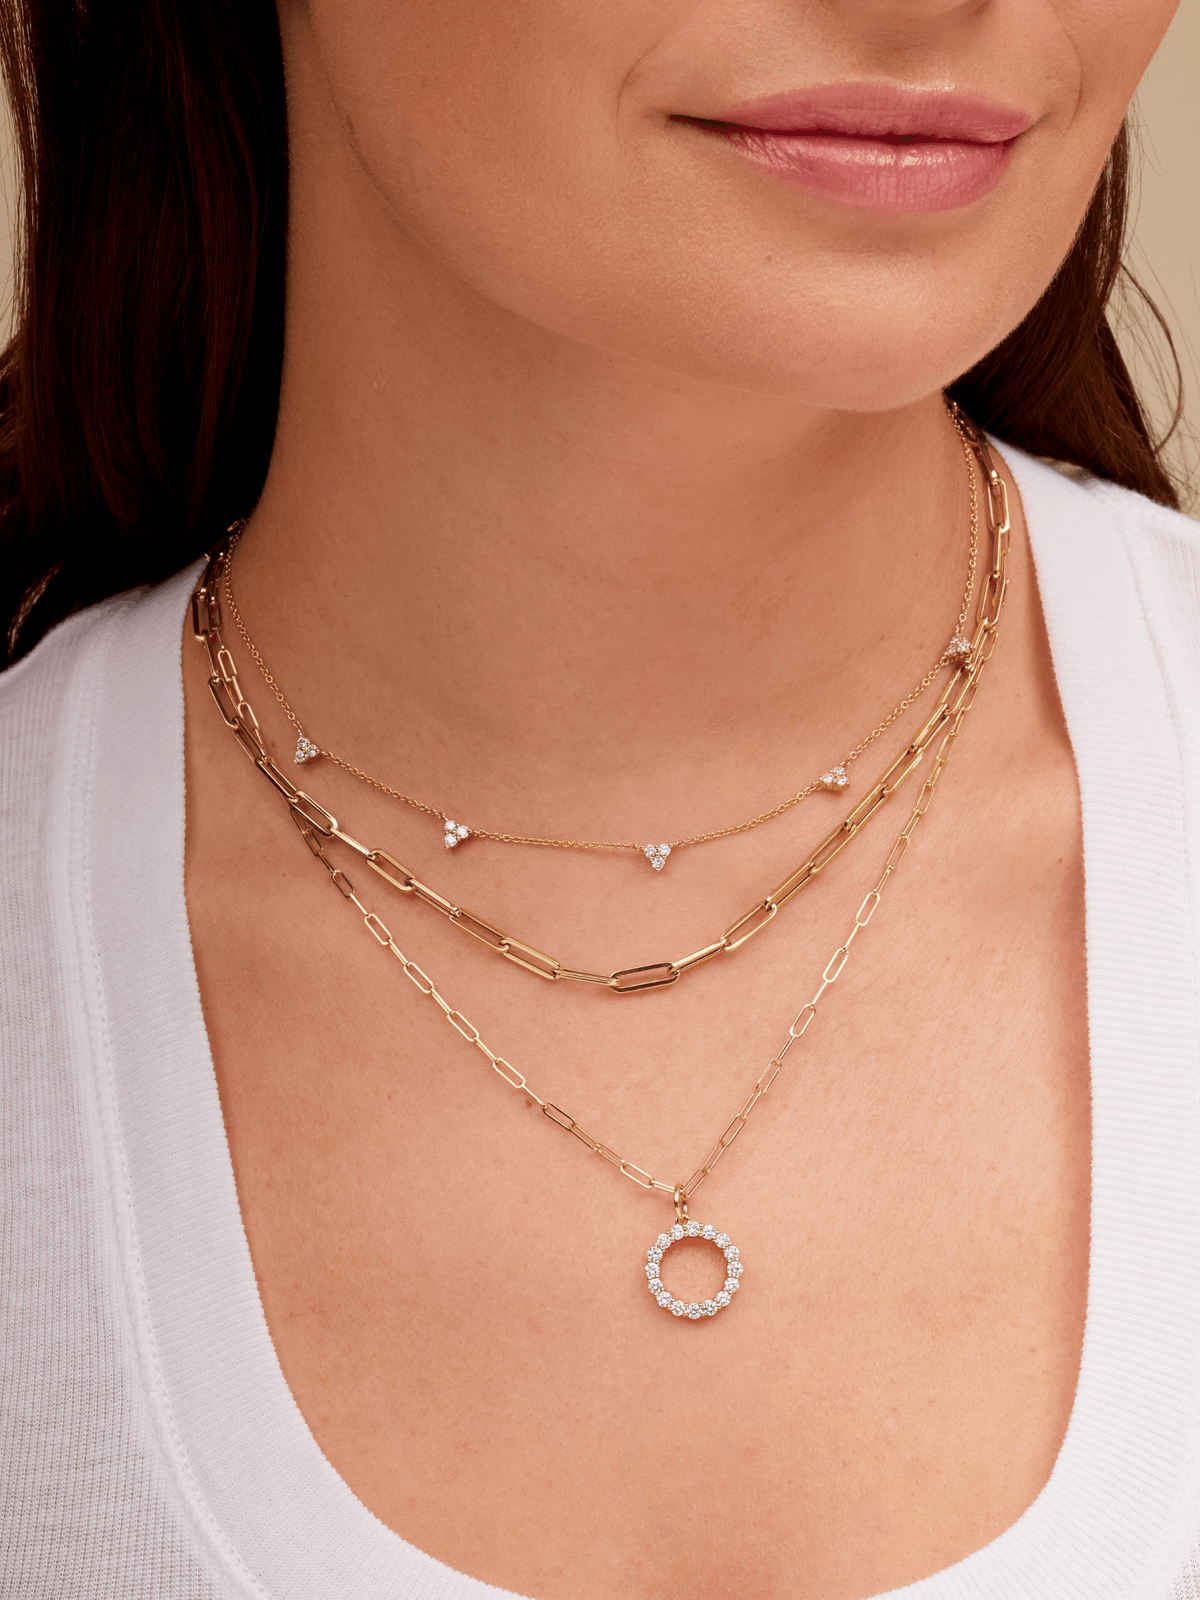 14K gold paperclip chain necklace layered with diamond trio layering necklace and diamond circle charm on thin gold paperclip chain